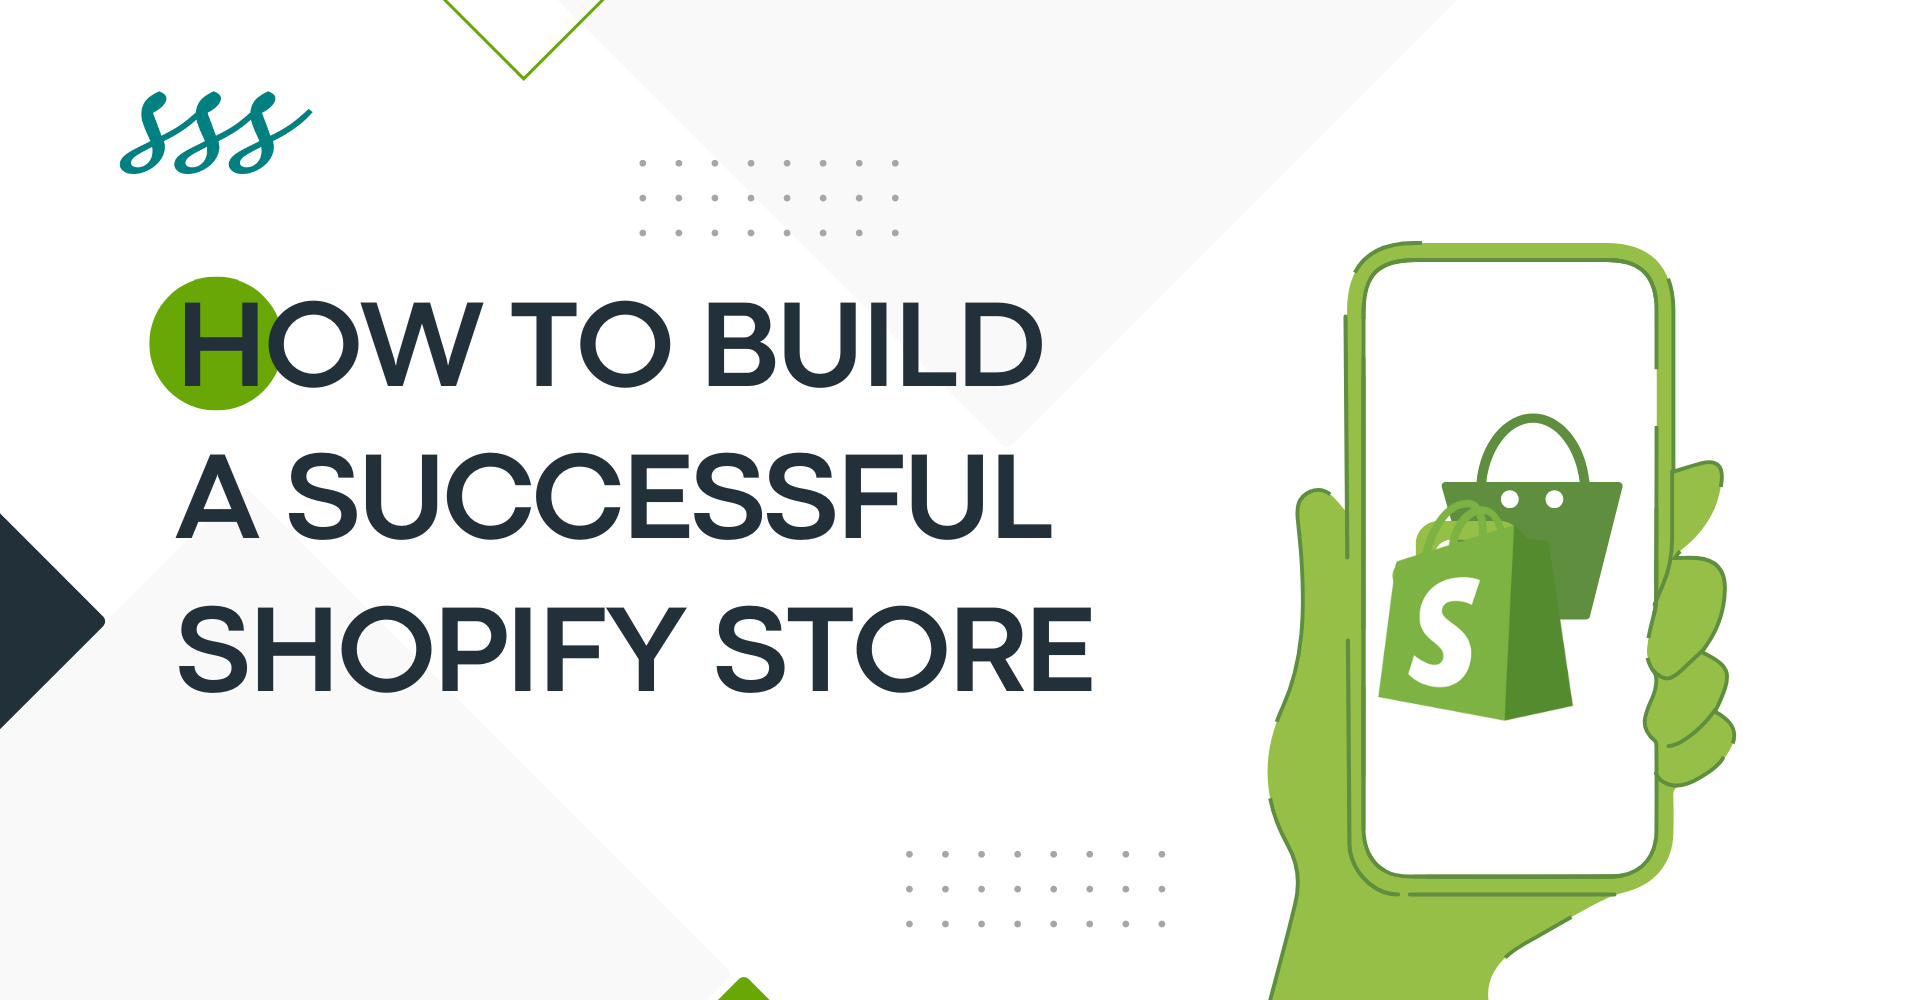 How to Build a Successful Shopify Store